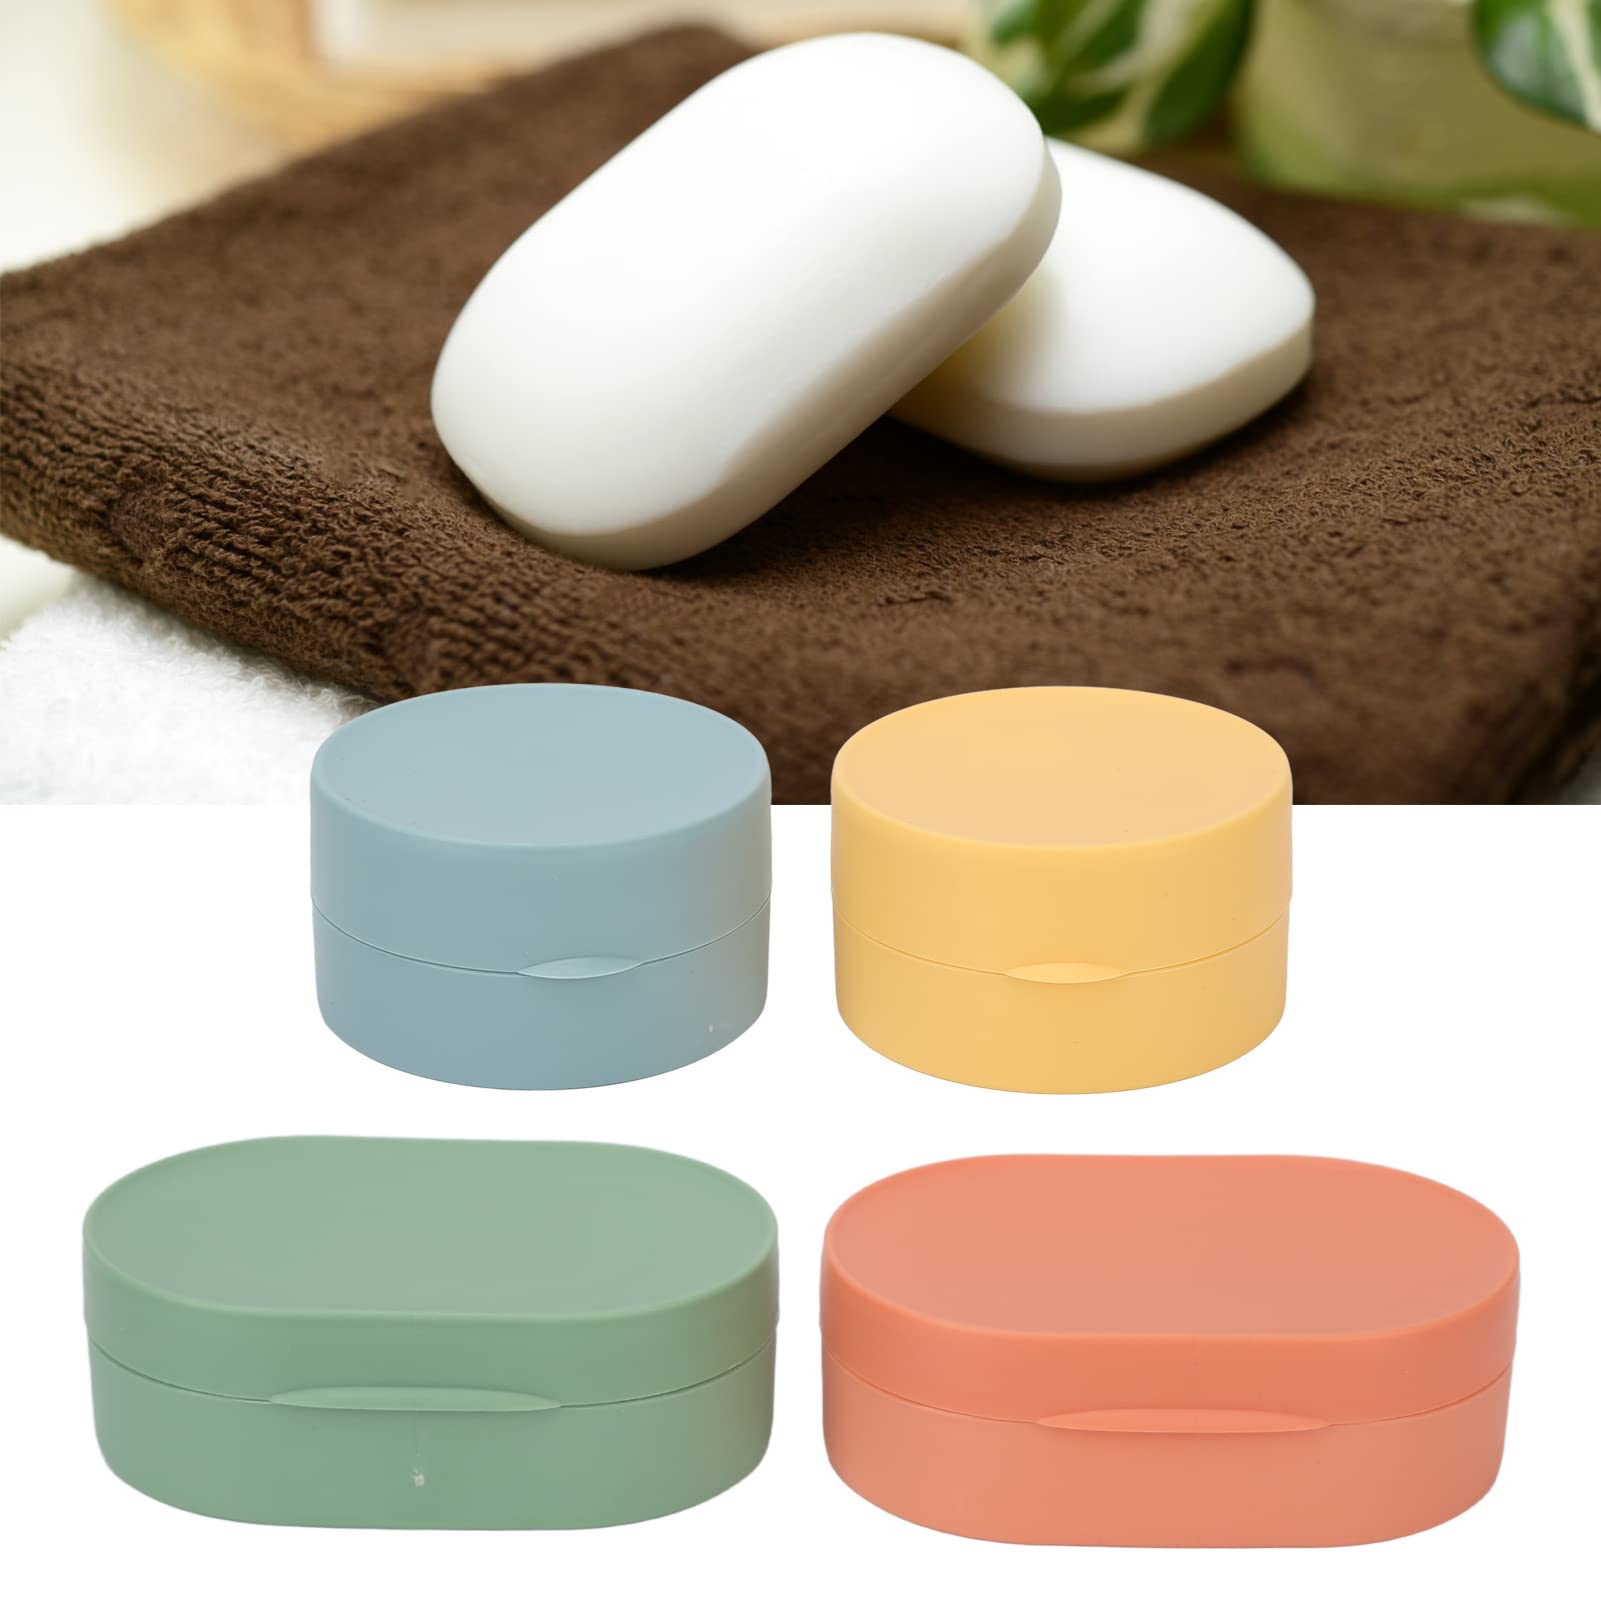 4pcs Soap Cases, Portable Round Oval Soap Holders, Travel Plastic Soap Case, Portable Soap Box Tray, Toilet Soap Containers Storage Boxes with Foaming Nets for Home, Bath, Hiking, Traveling